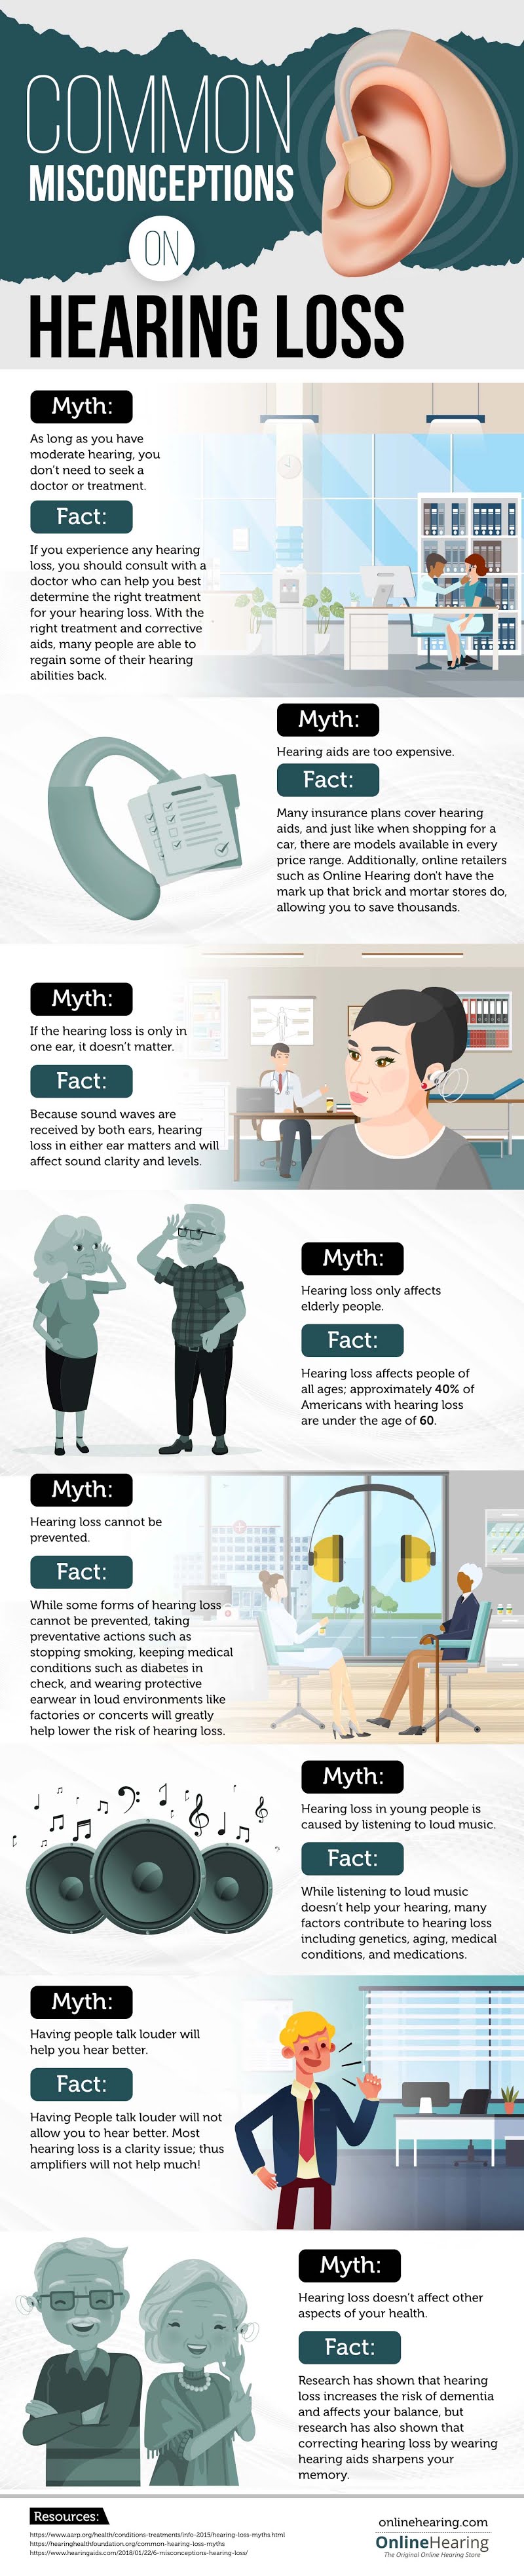 Common Misconceptions on Hearing Loss #Infographic